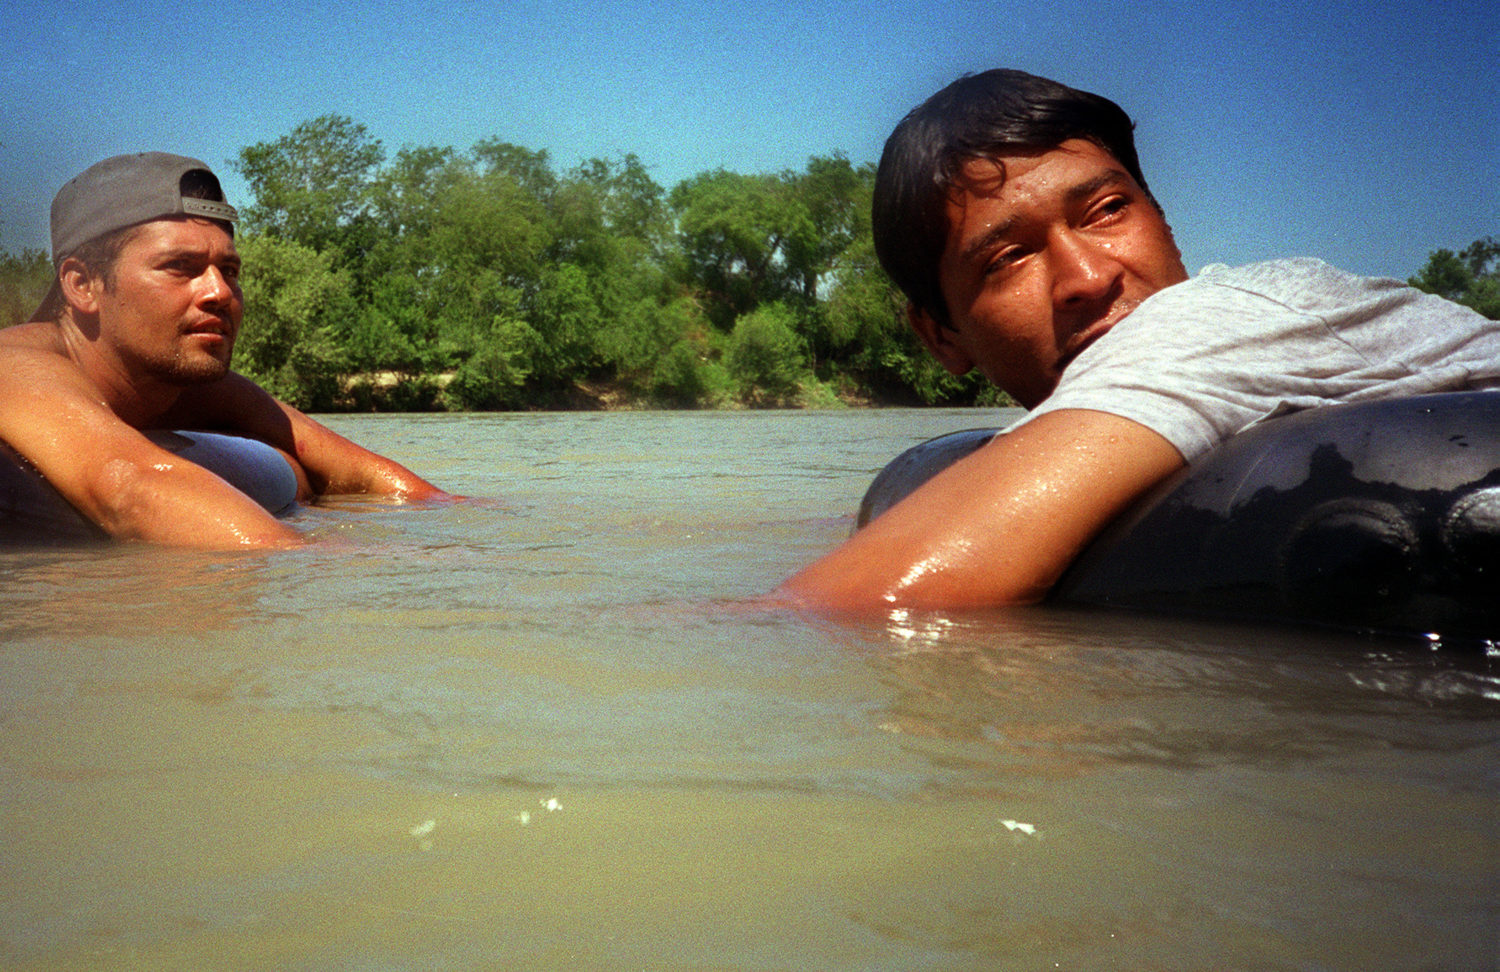 Hondurans Hernan Bonillo and Miguel Olivio react to U.S. Border Patrol agents telling them to move back across the Rio Grande toward Nuevo Laredo, Mexico. Enrique spent several weeks in that city before crossing the border into the U.S. in 2000